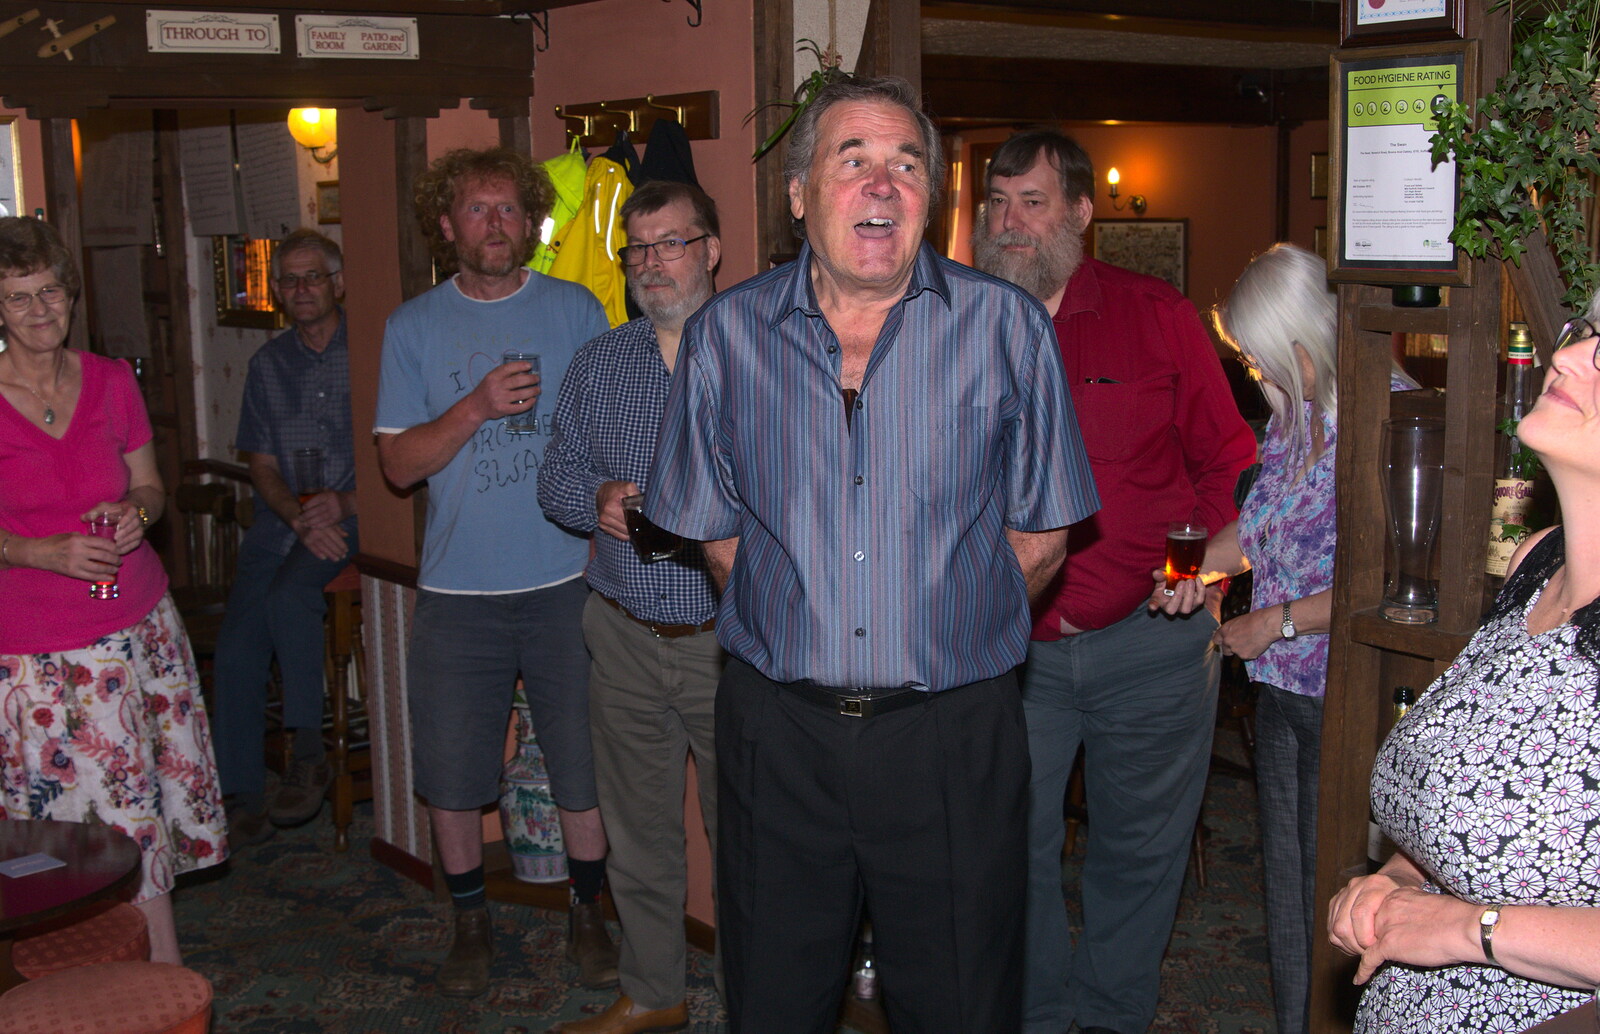 Alan does a retirement speech from A Retirement: The Last Night of The Swan Inn, Brome, Suffolk - 3rd June 2017